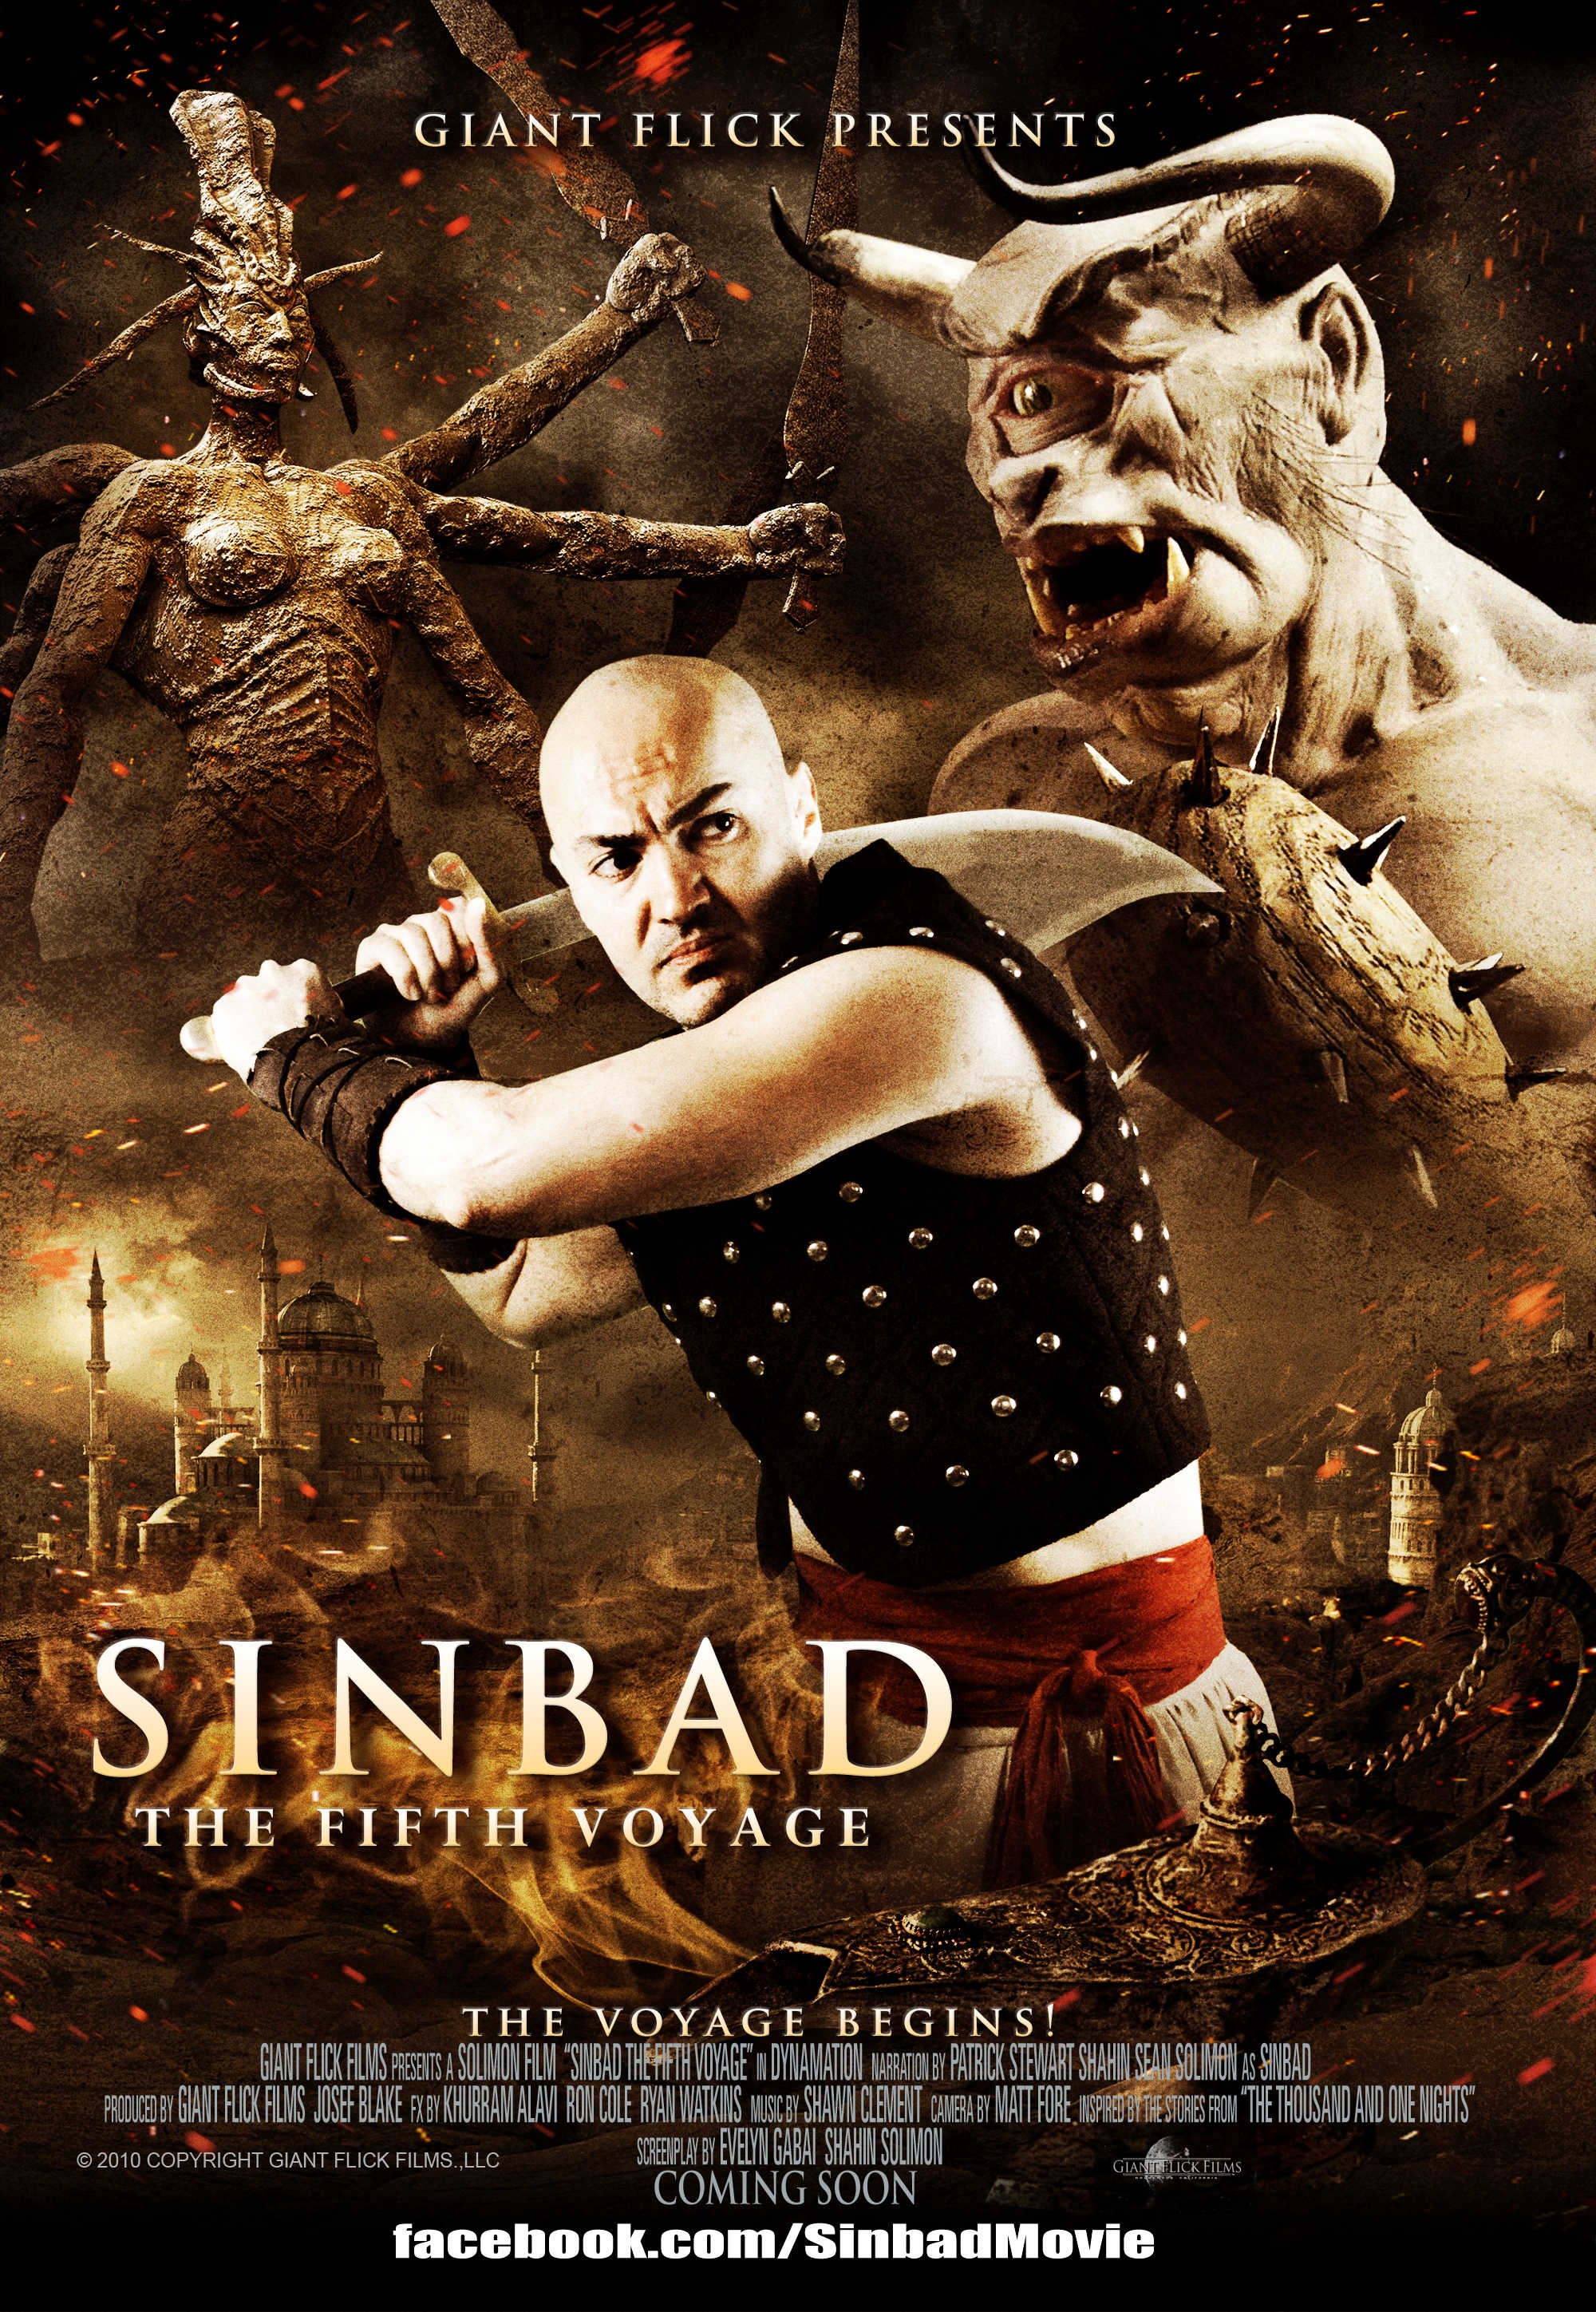 Poster of Giant Flick Films' Sinbad: The Fifth Voyage (2014)